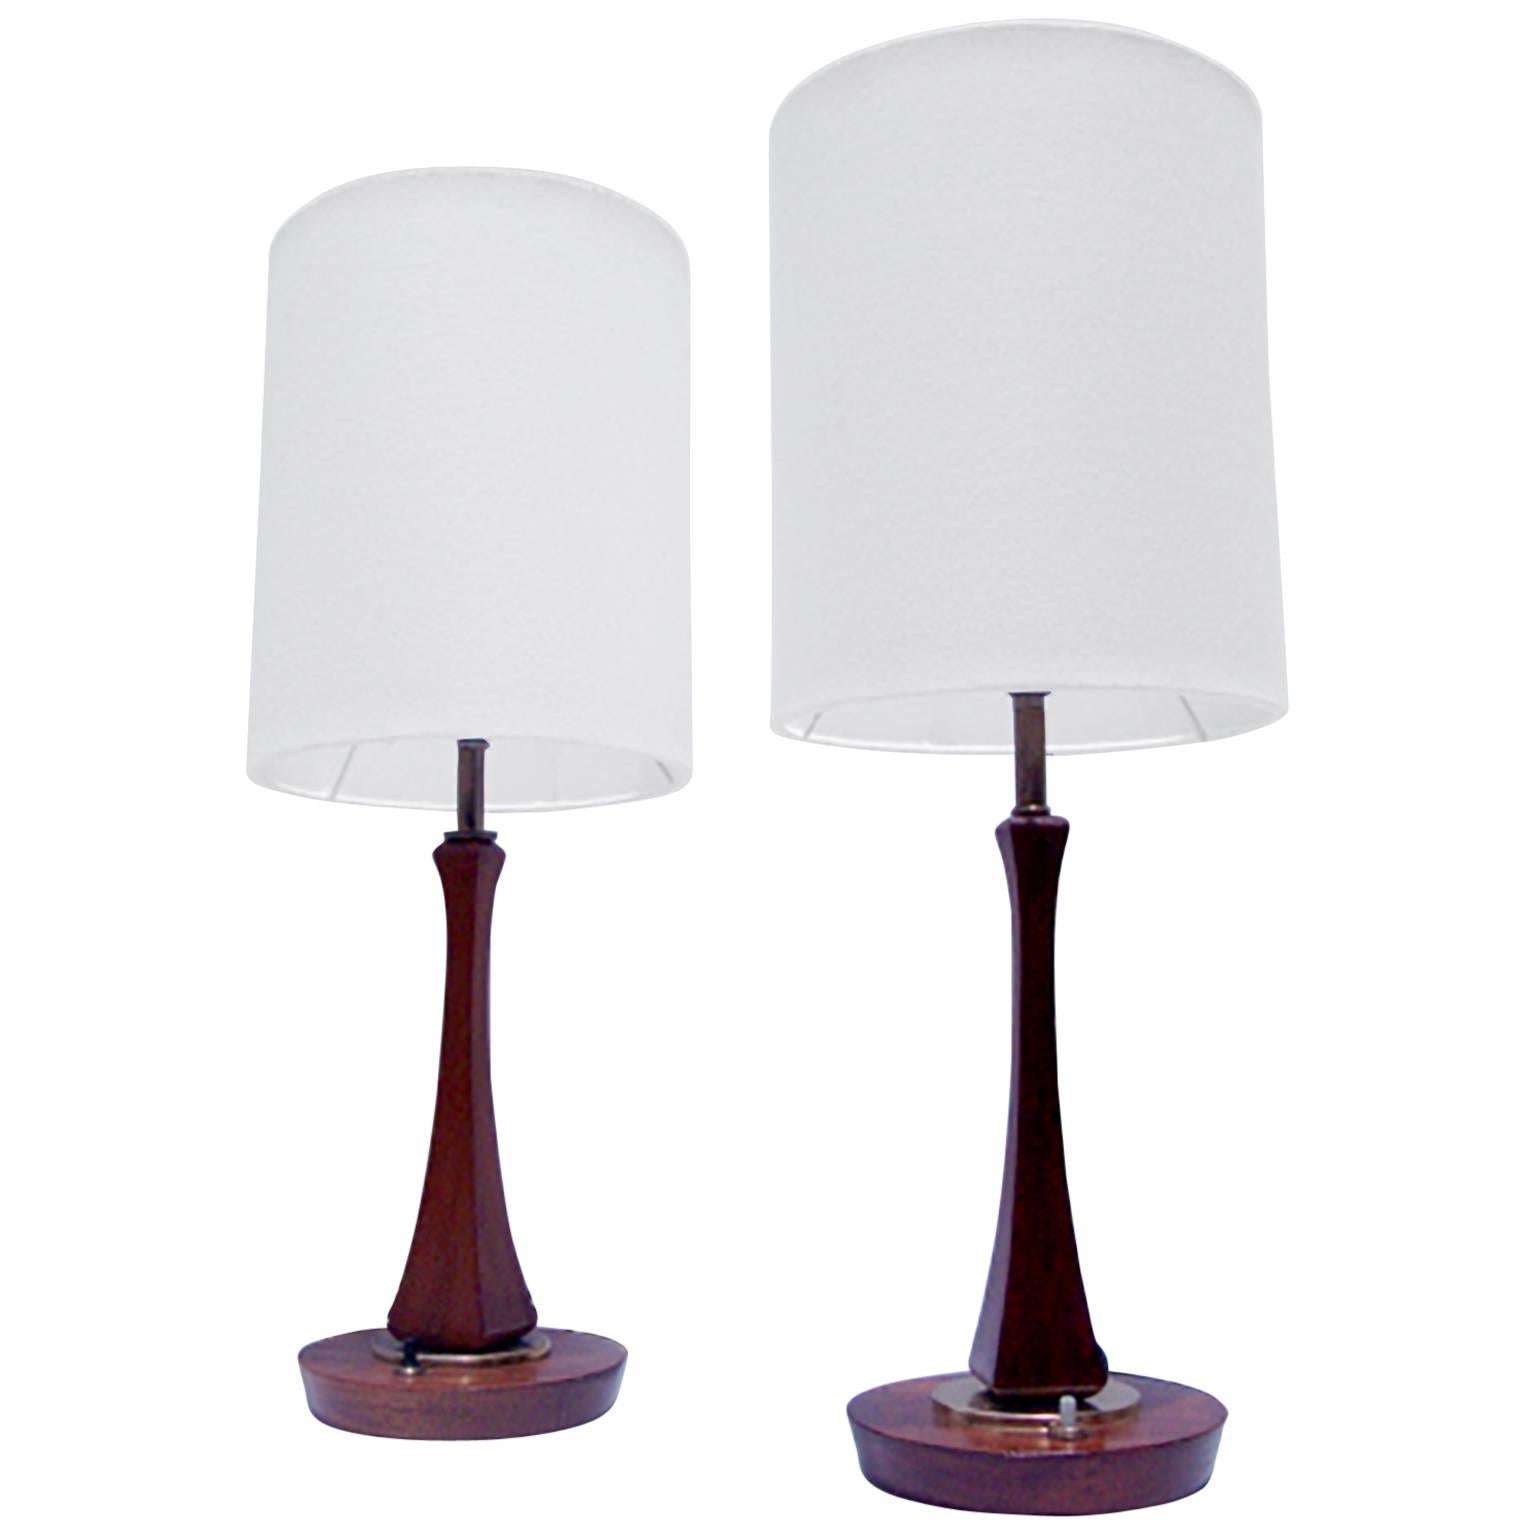 Pair of Mid-Century Modern Sculptural Table Lamps